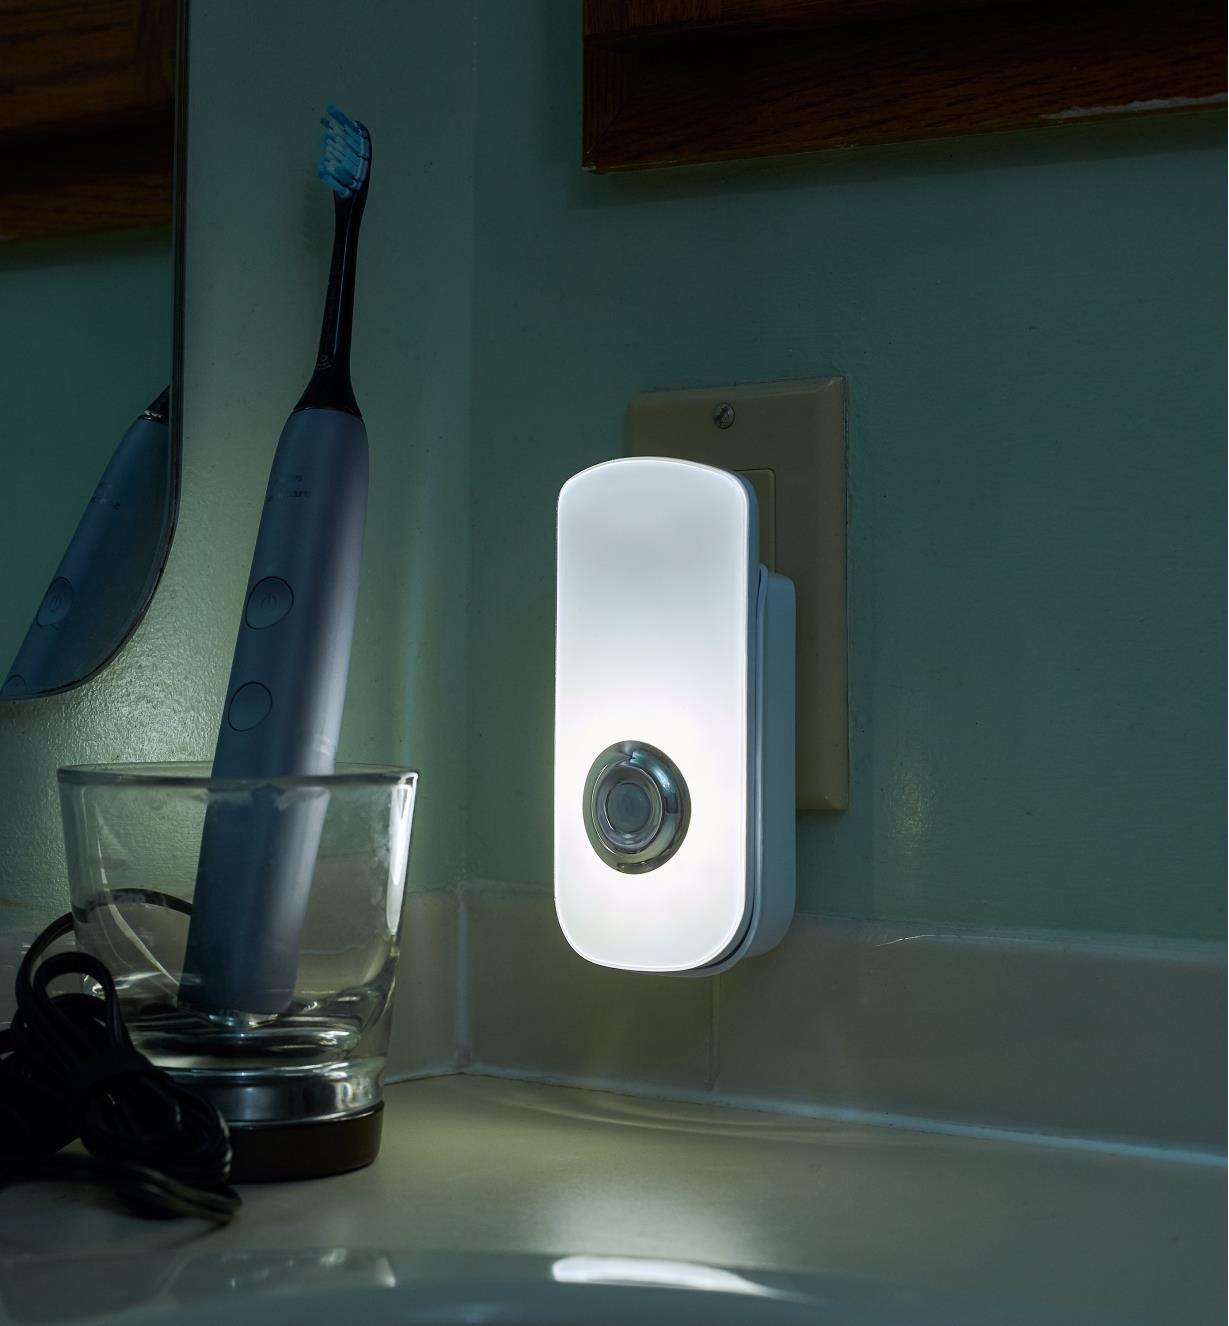 Rechargeable LED nightlight/flashlight plugged into a standard outlet